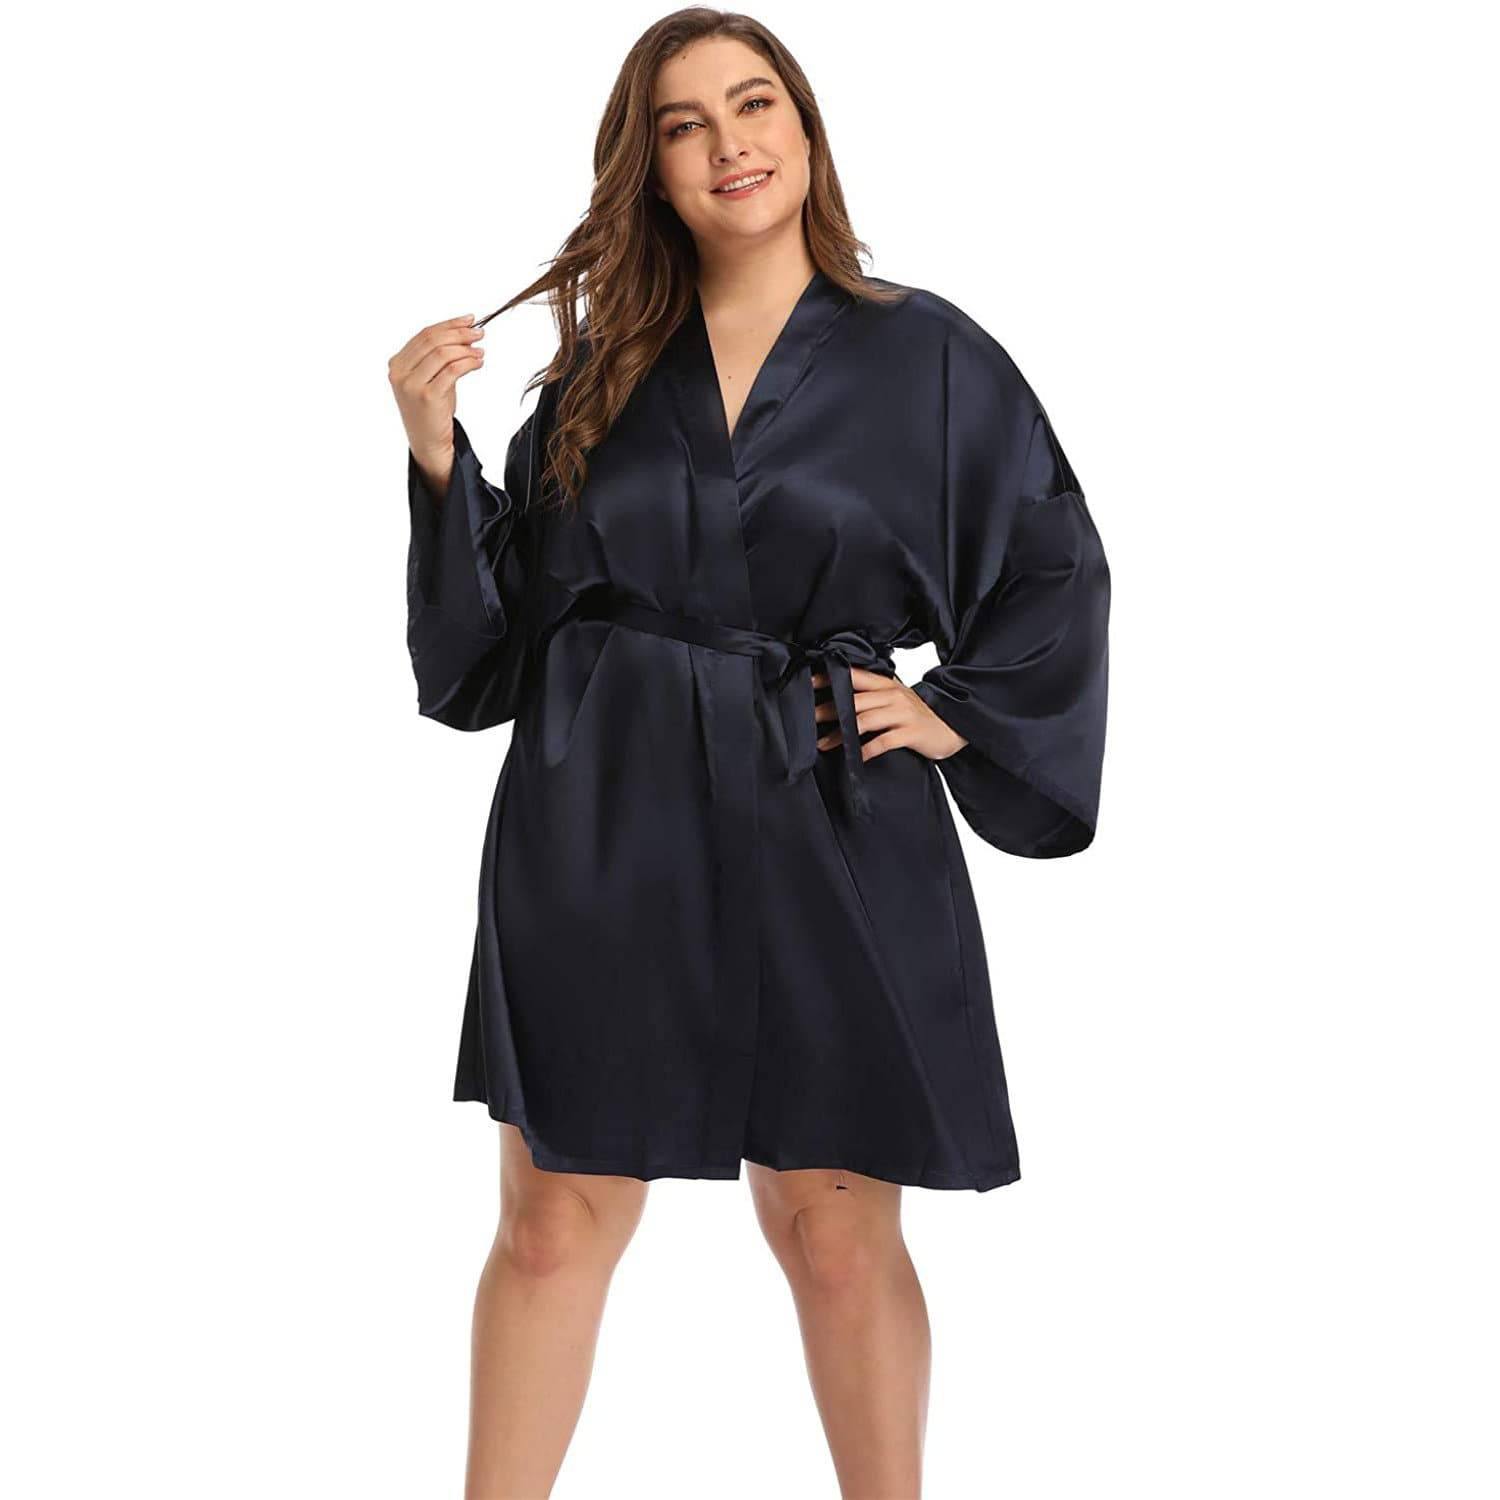 Plus Size Silk Robes For Women With Belt 100% Mulberry Silk Bathrobes